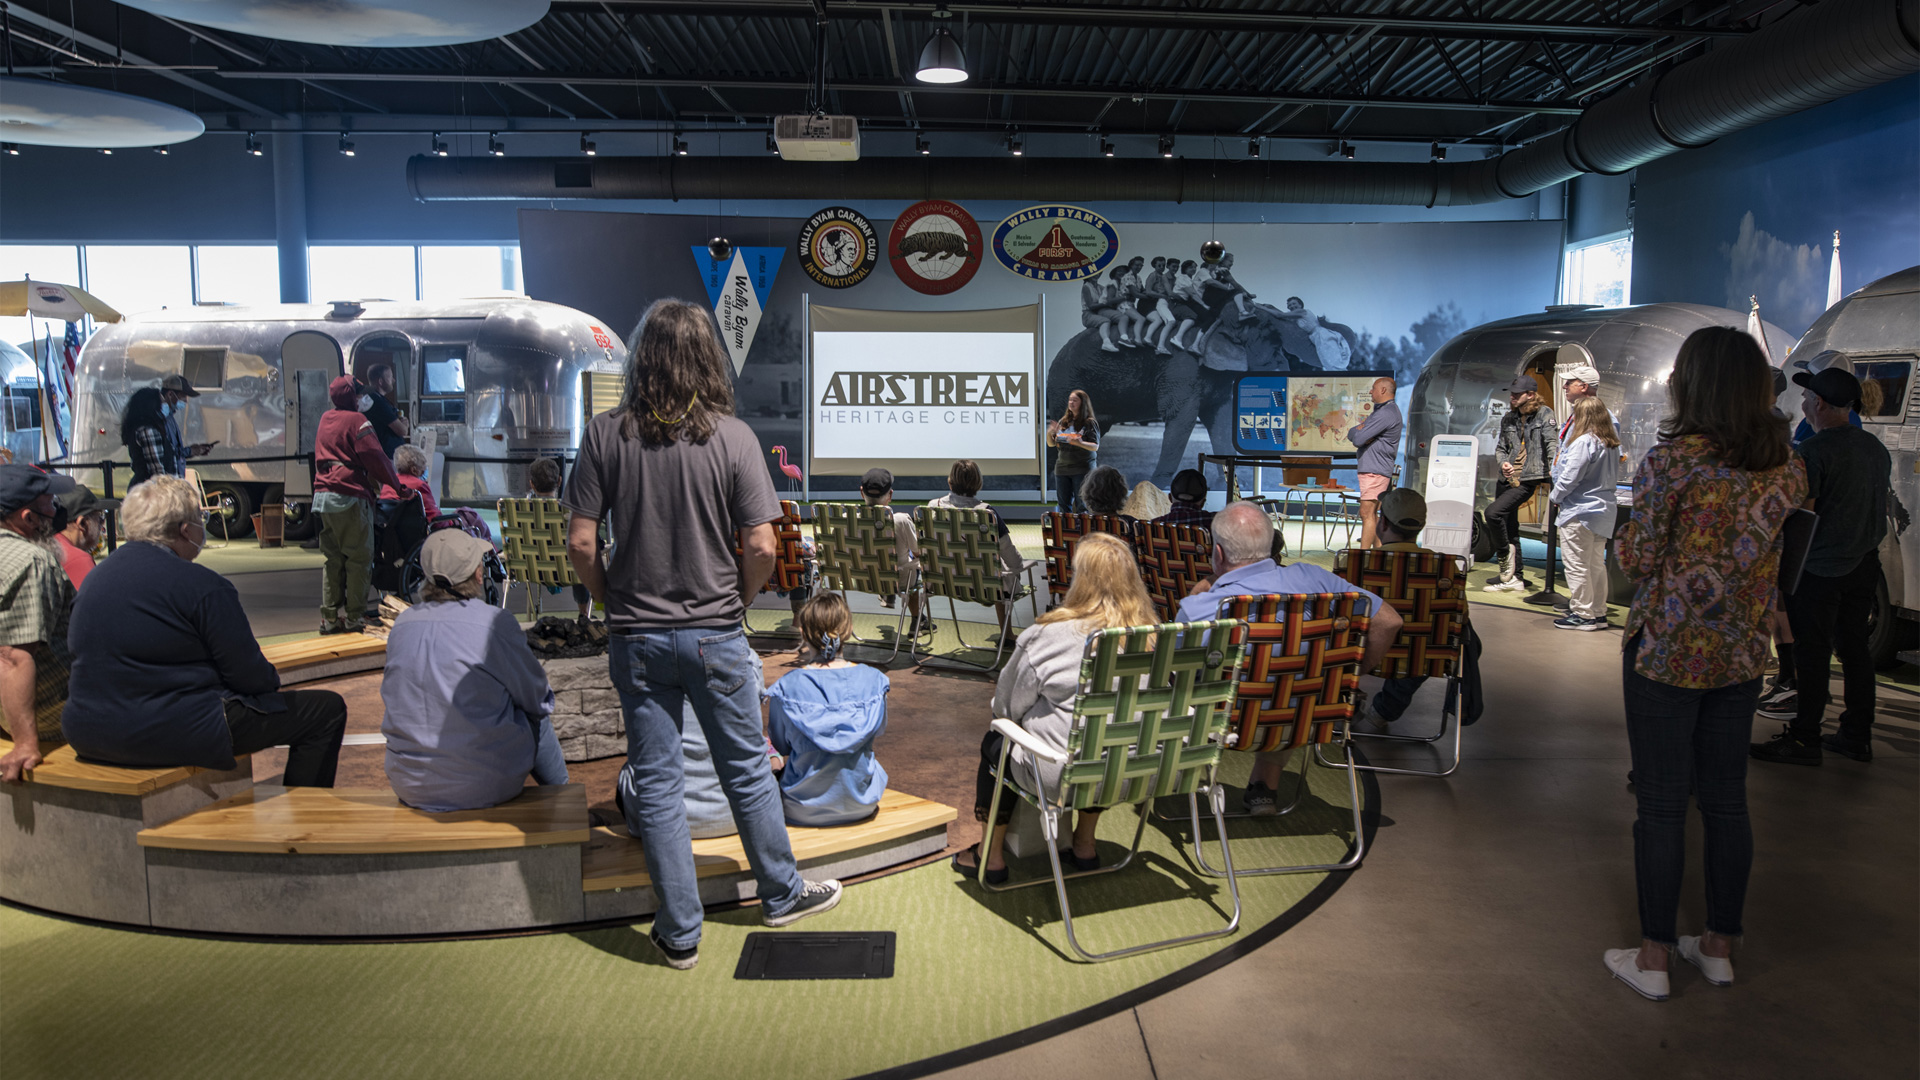 A group of people listening to a presentation in the Airstream Heritage Center during the opening weekend.